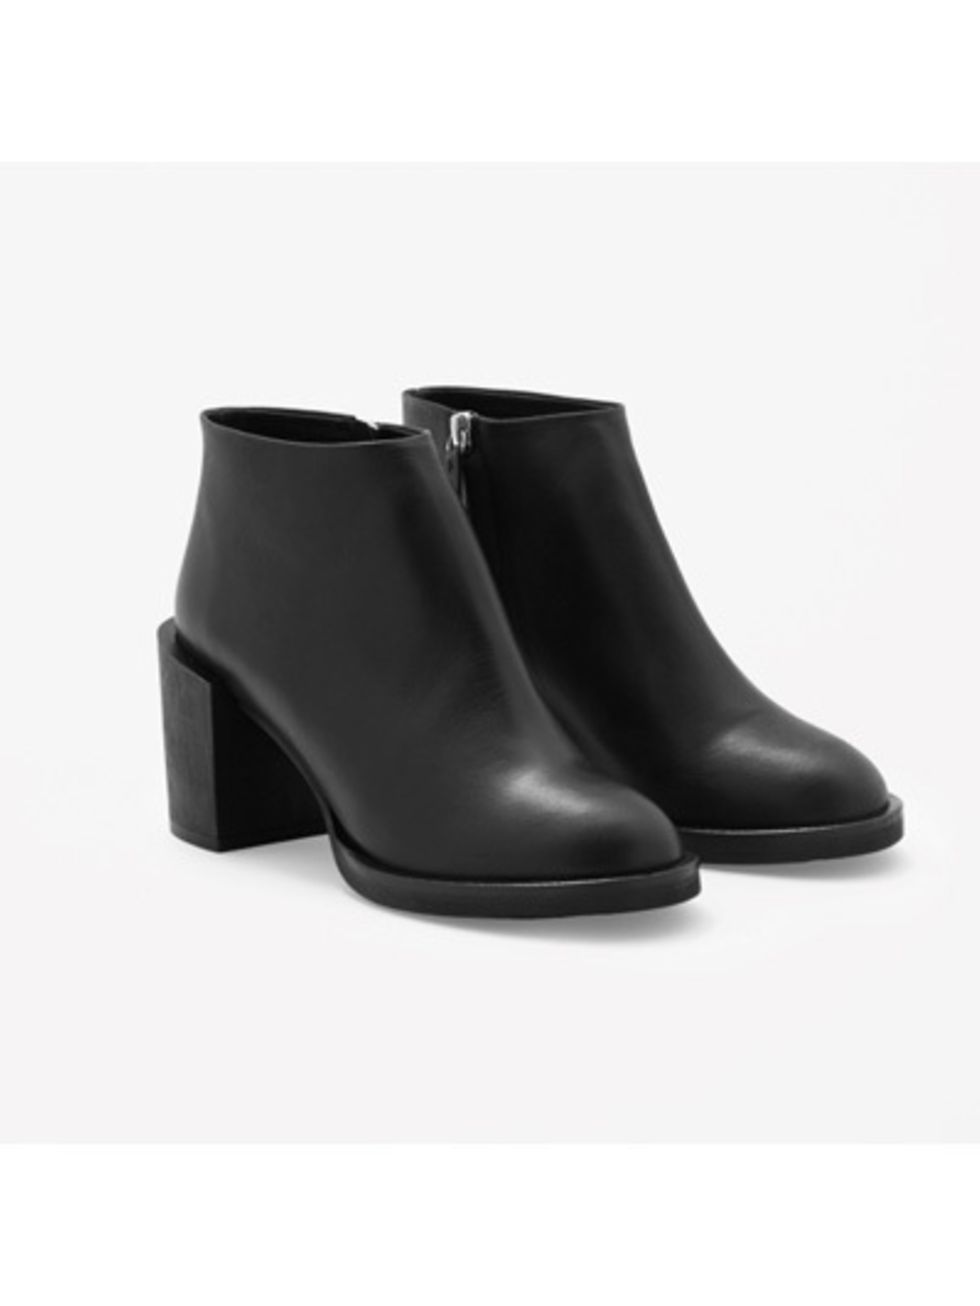 Boot, Leather, Black, Synthetic rubber, Dress shoe, Fashion design, High heels, 